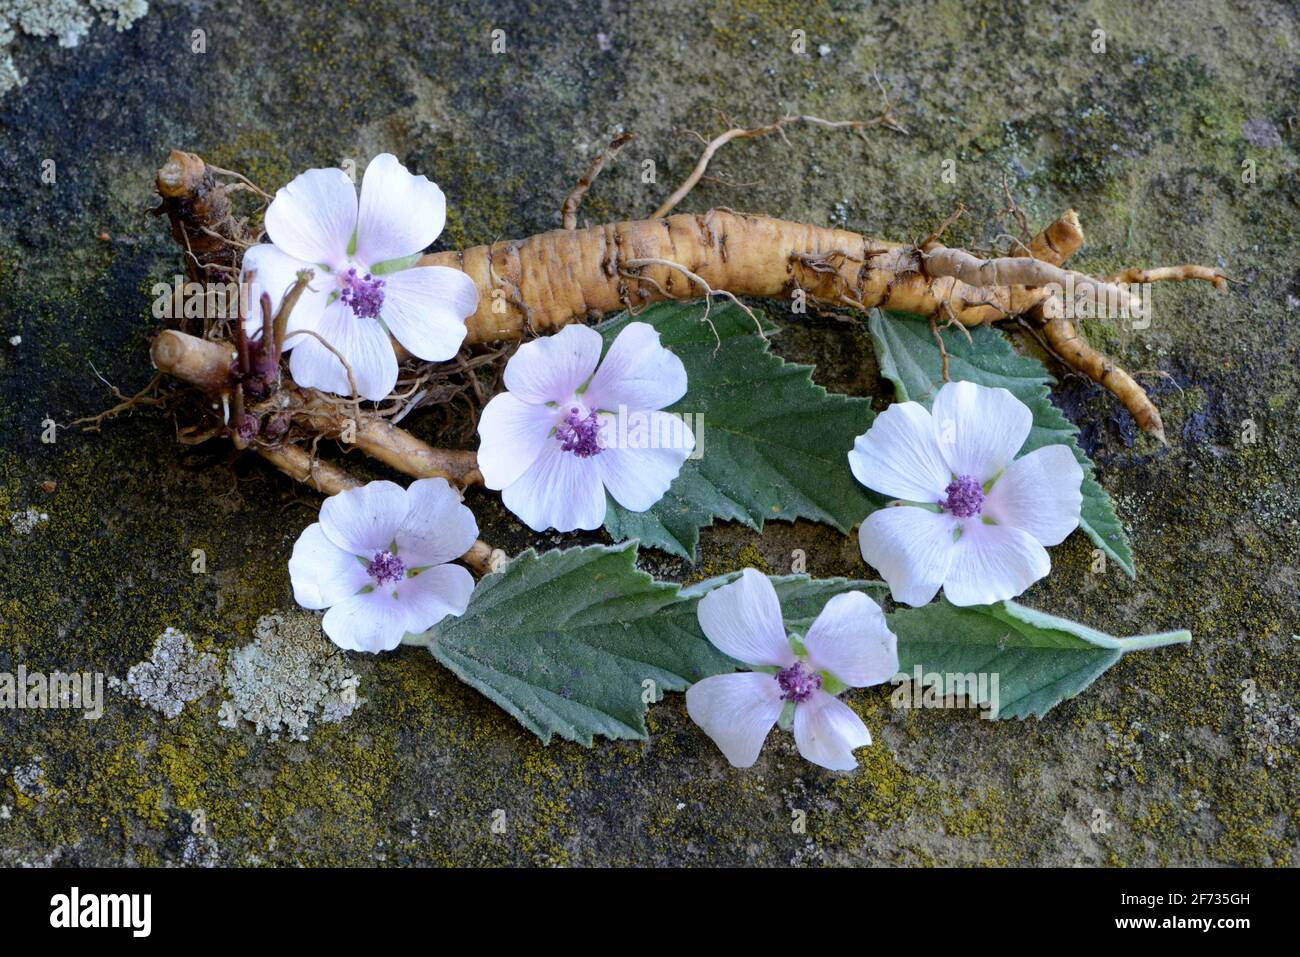 Althaea officinalis (Althea officinalis) Root and flowers, marshmallow root, Ade root, Altee, Alter Thee, Alte Eh, Driant root, Eibsche, river herb Stock Photo